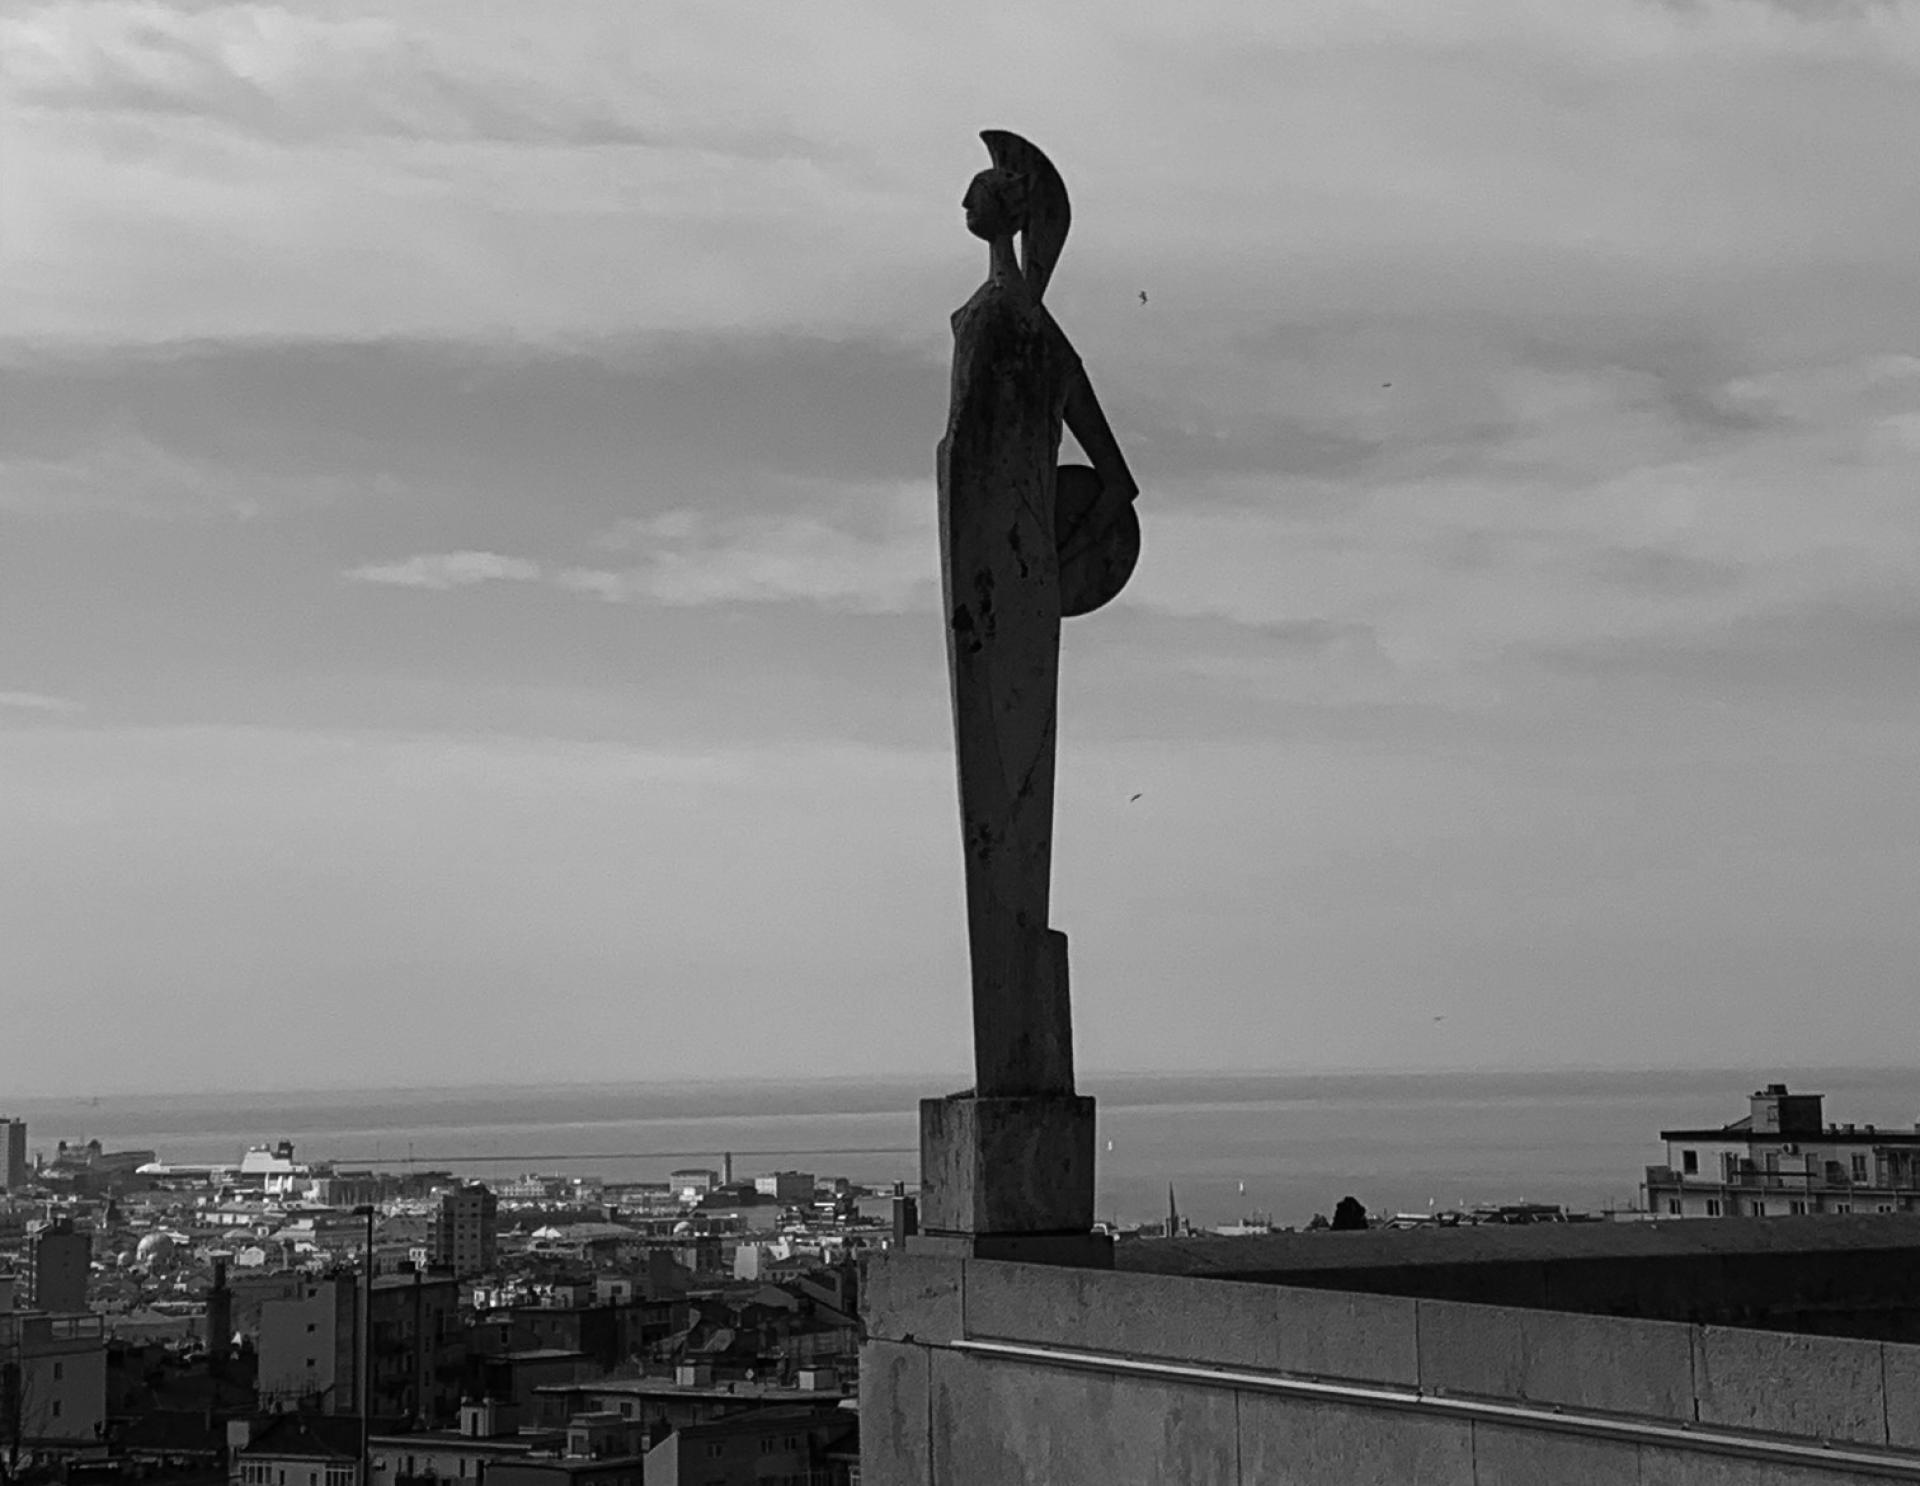 Minerva at the University building gazes over the city.